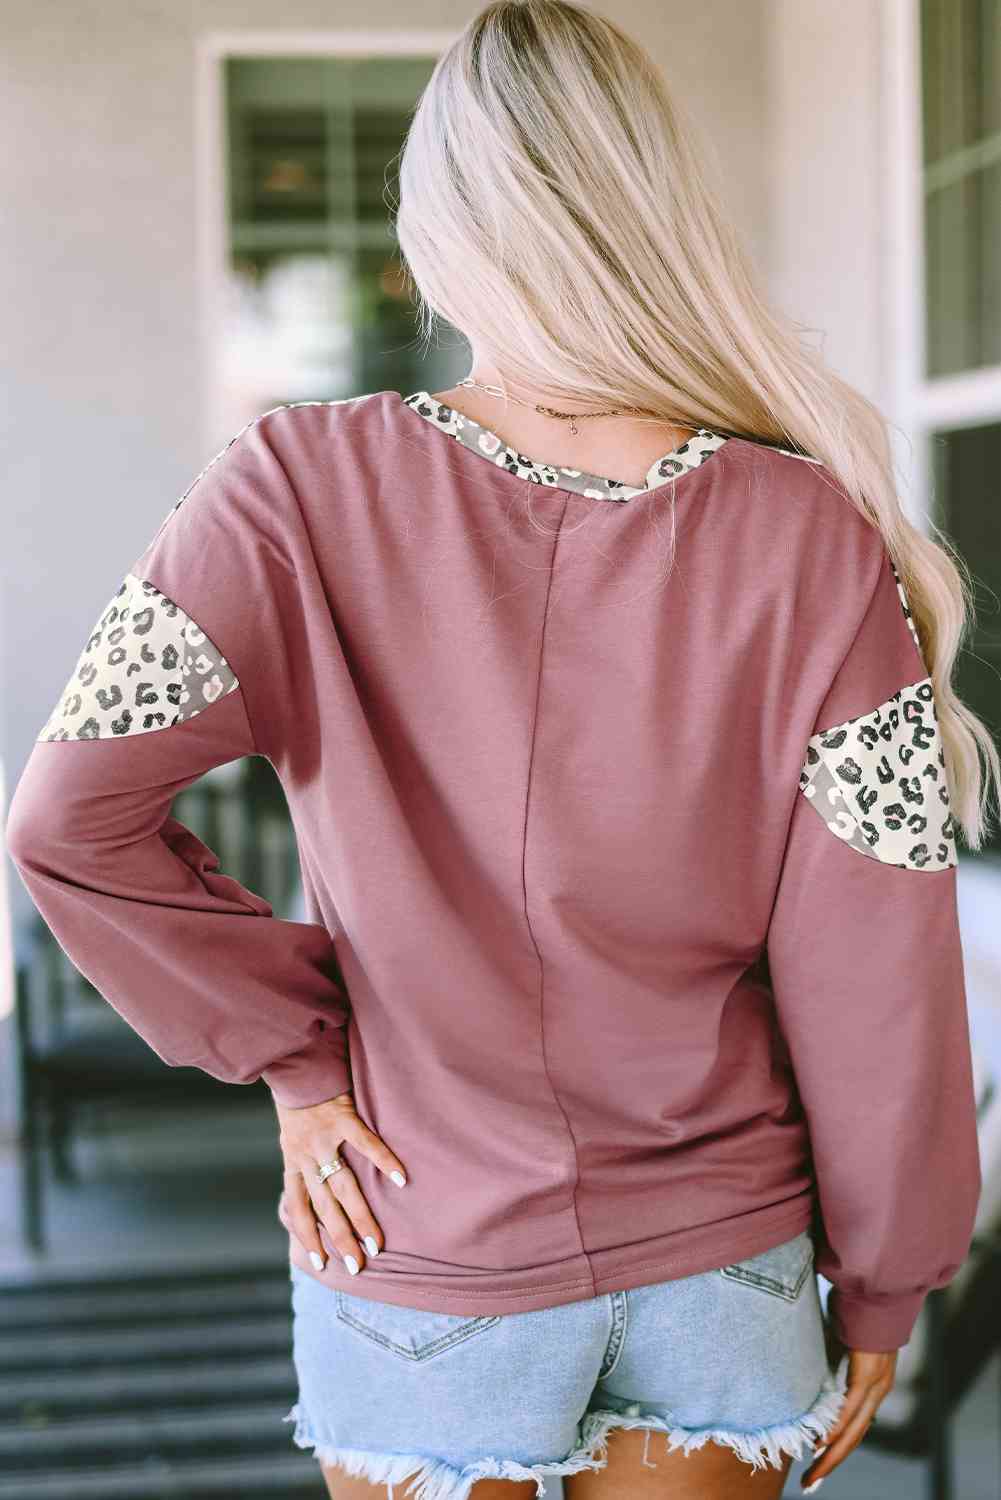 She's All That Long Sleeve Leopard Top